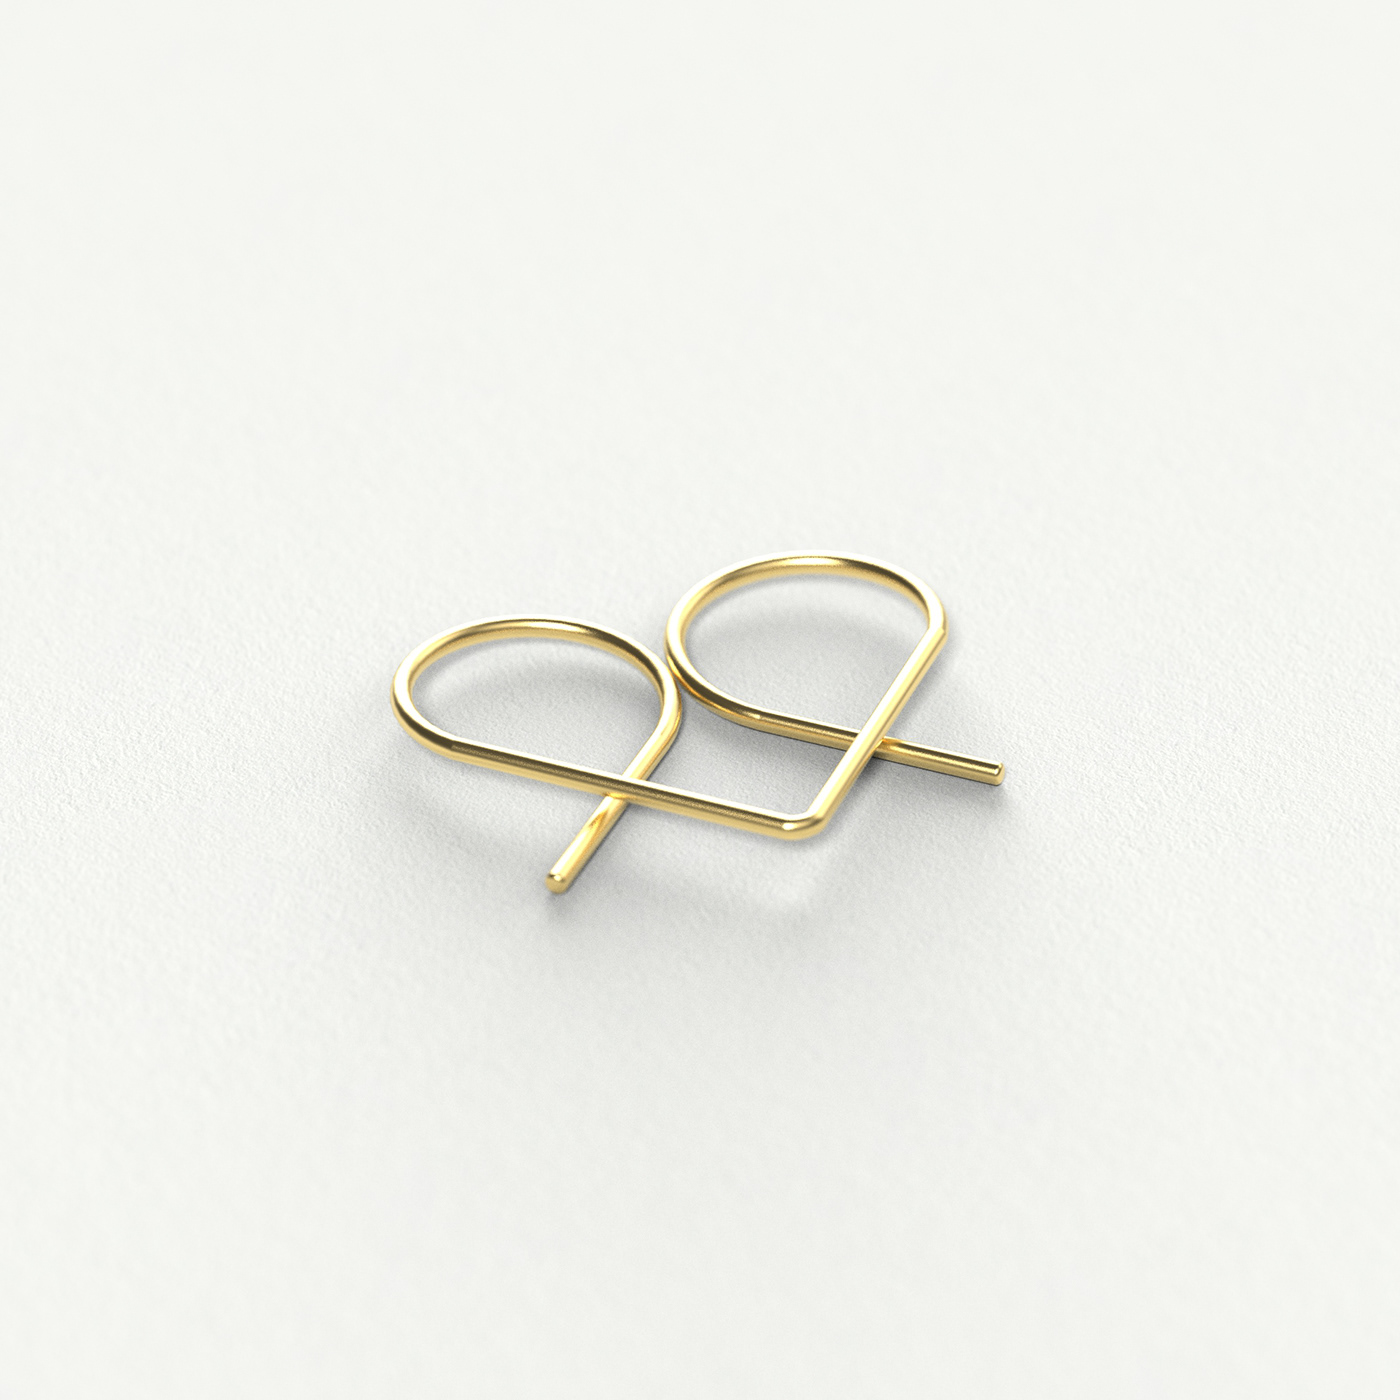 3D CGI concept gold heart industrial design  jewelry Office paperclip product design 